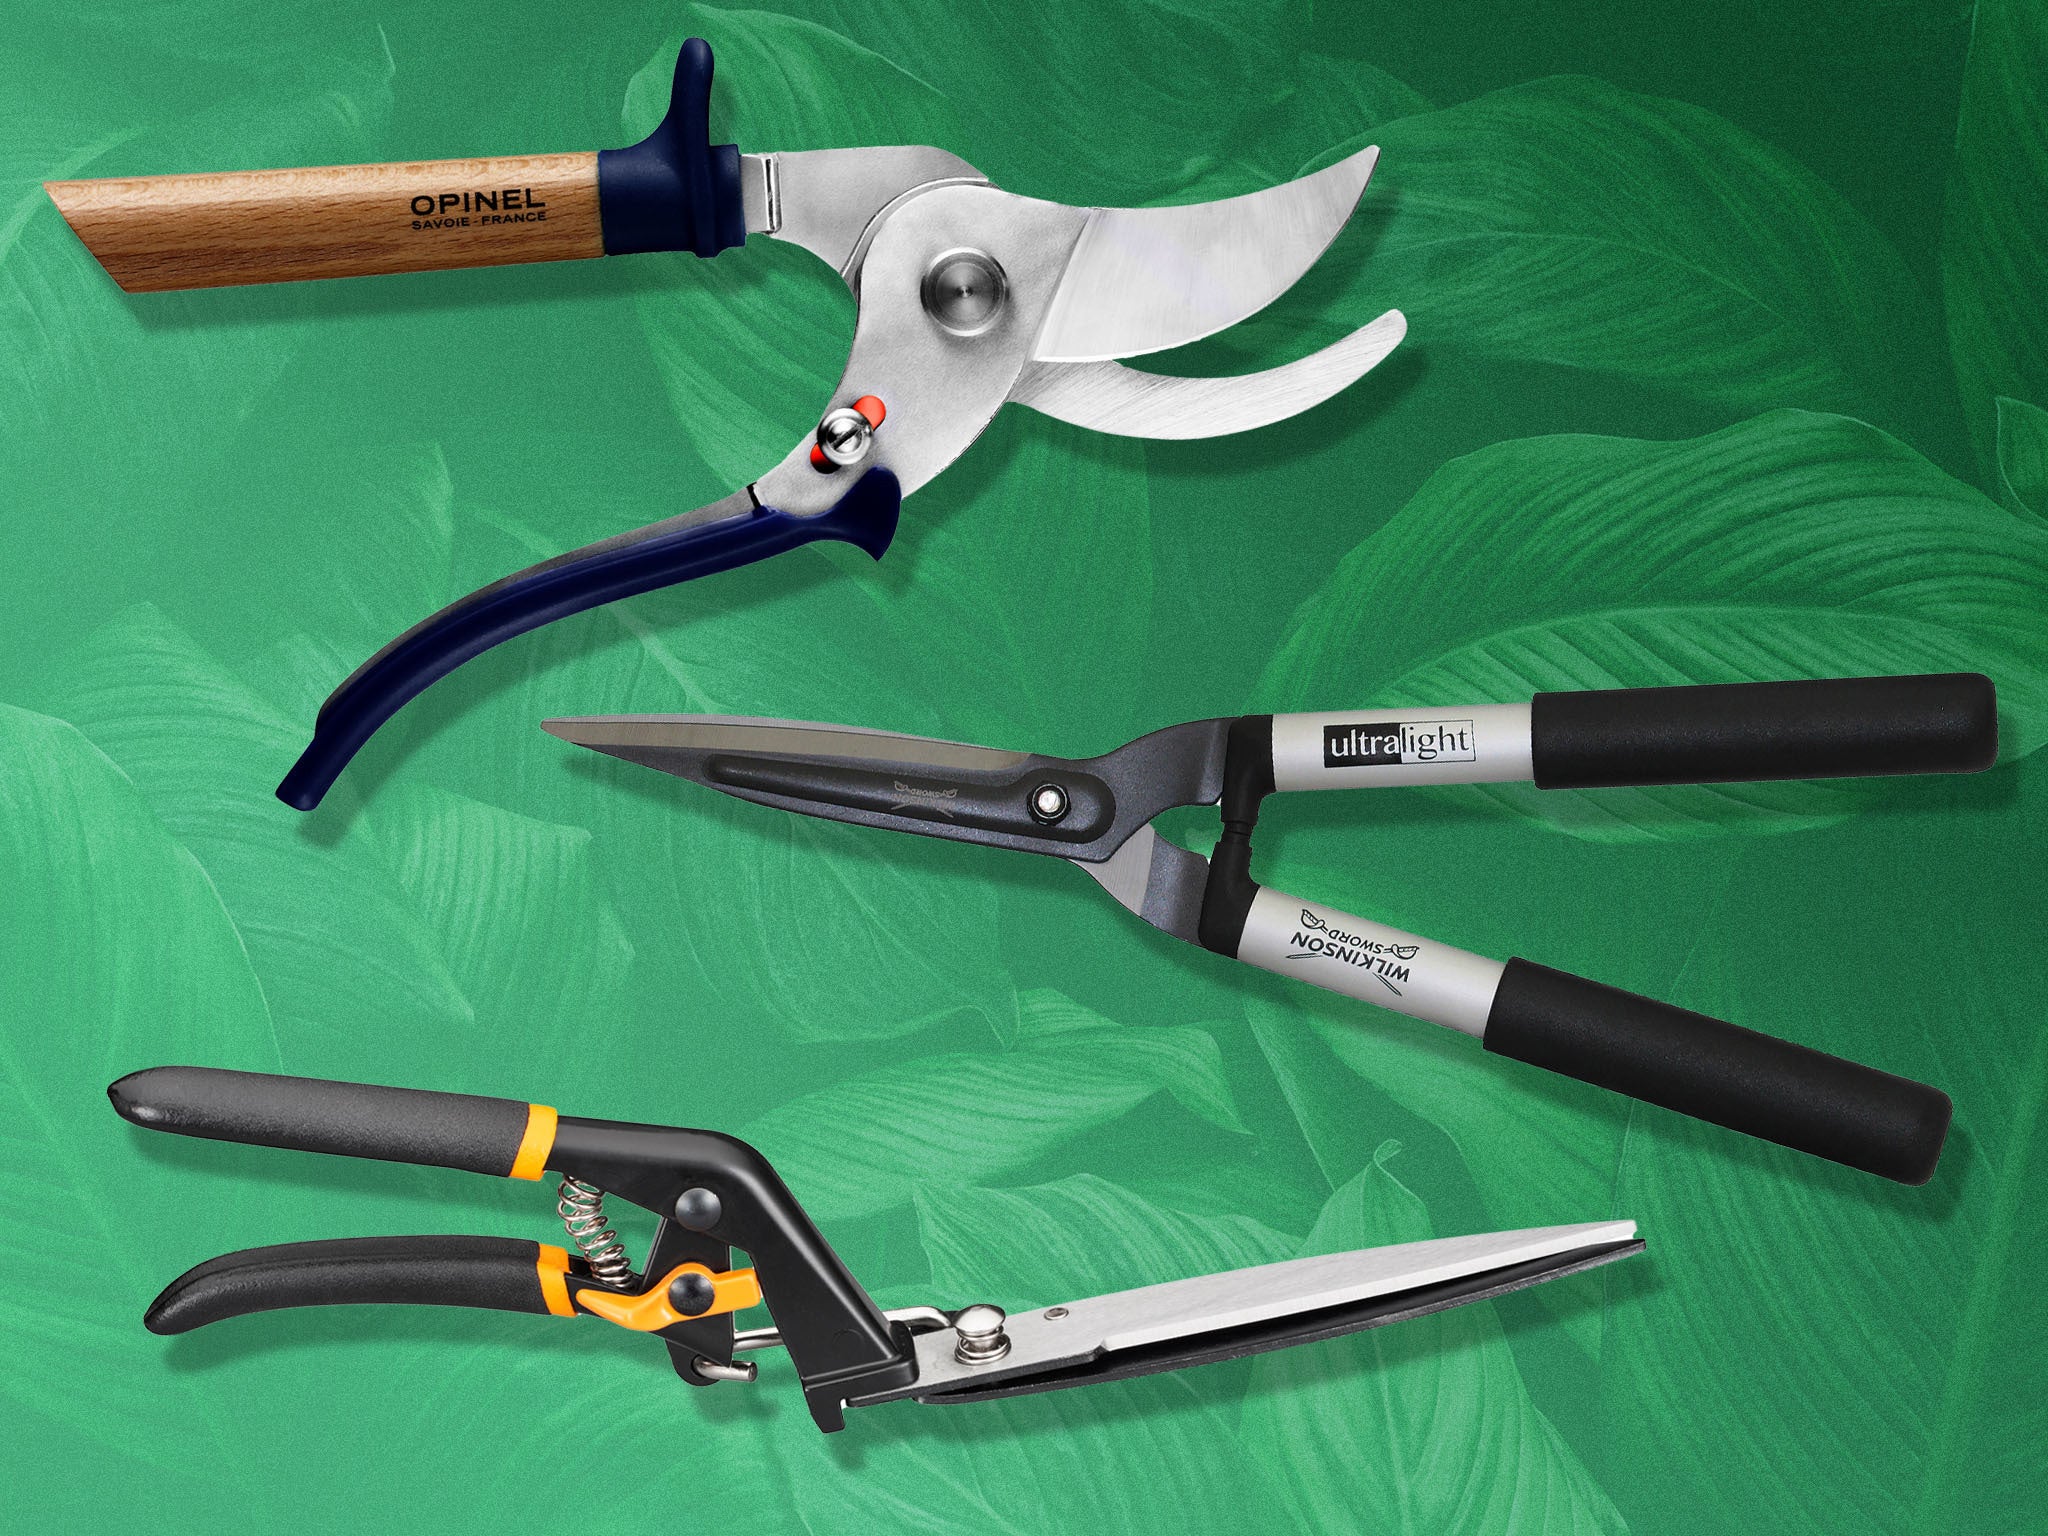 20 Best Garden Shears - Hedge Shears and Clippers to Buy